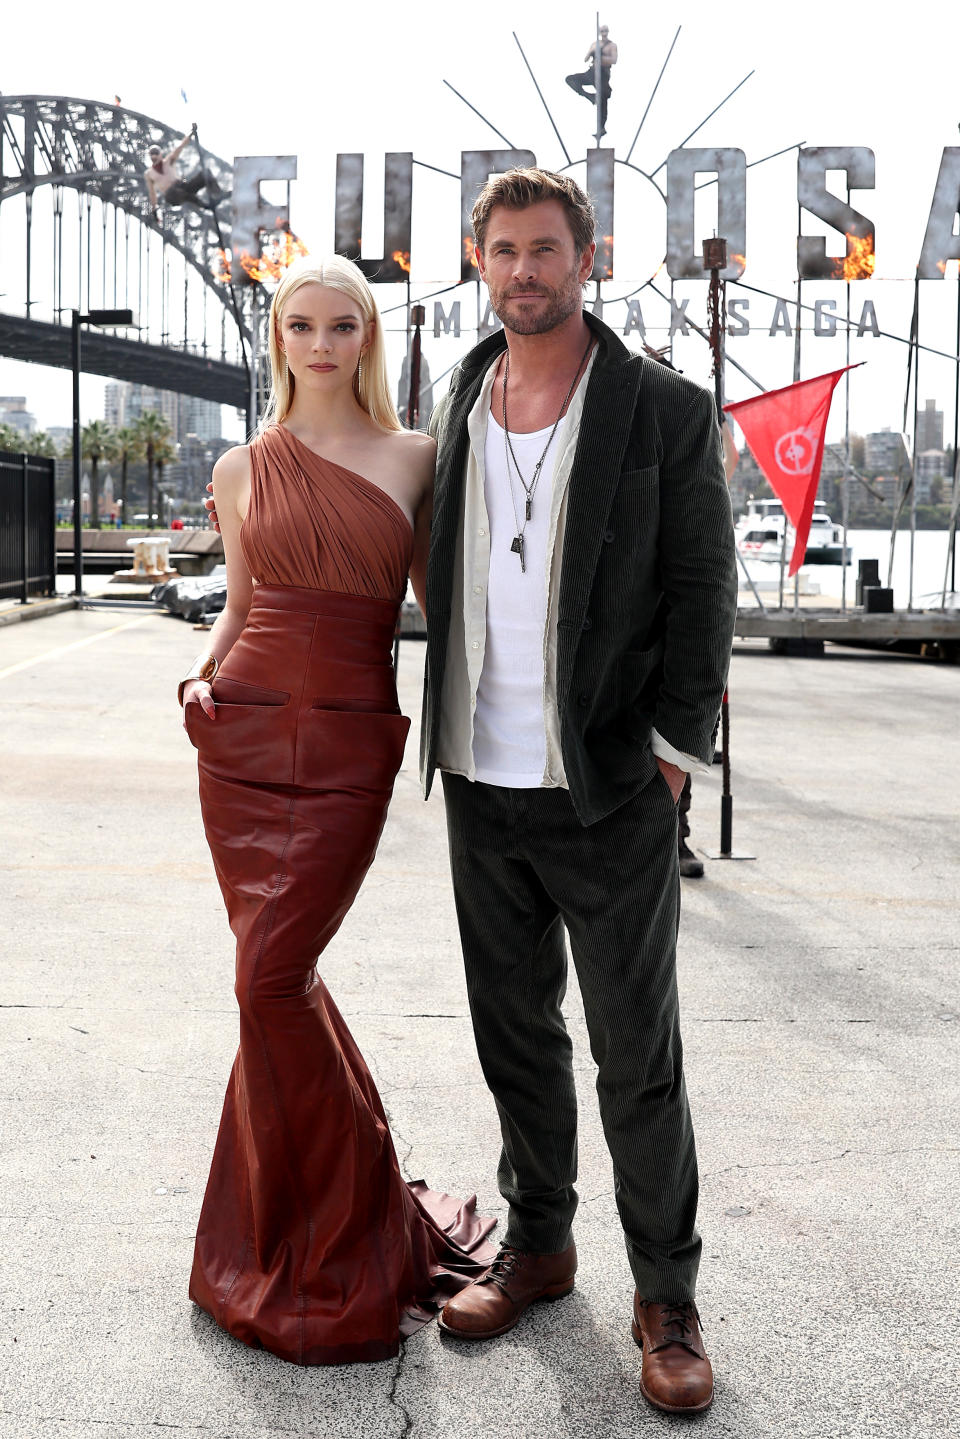 Anya Taylor-Joy stands next to Chris Hemsworth as they pose at a photo-call.